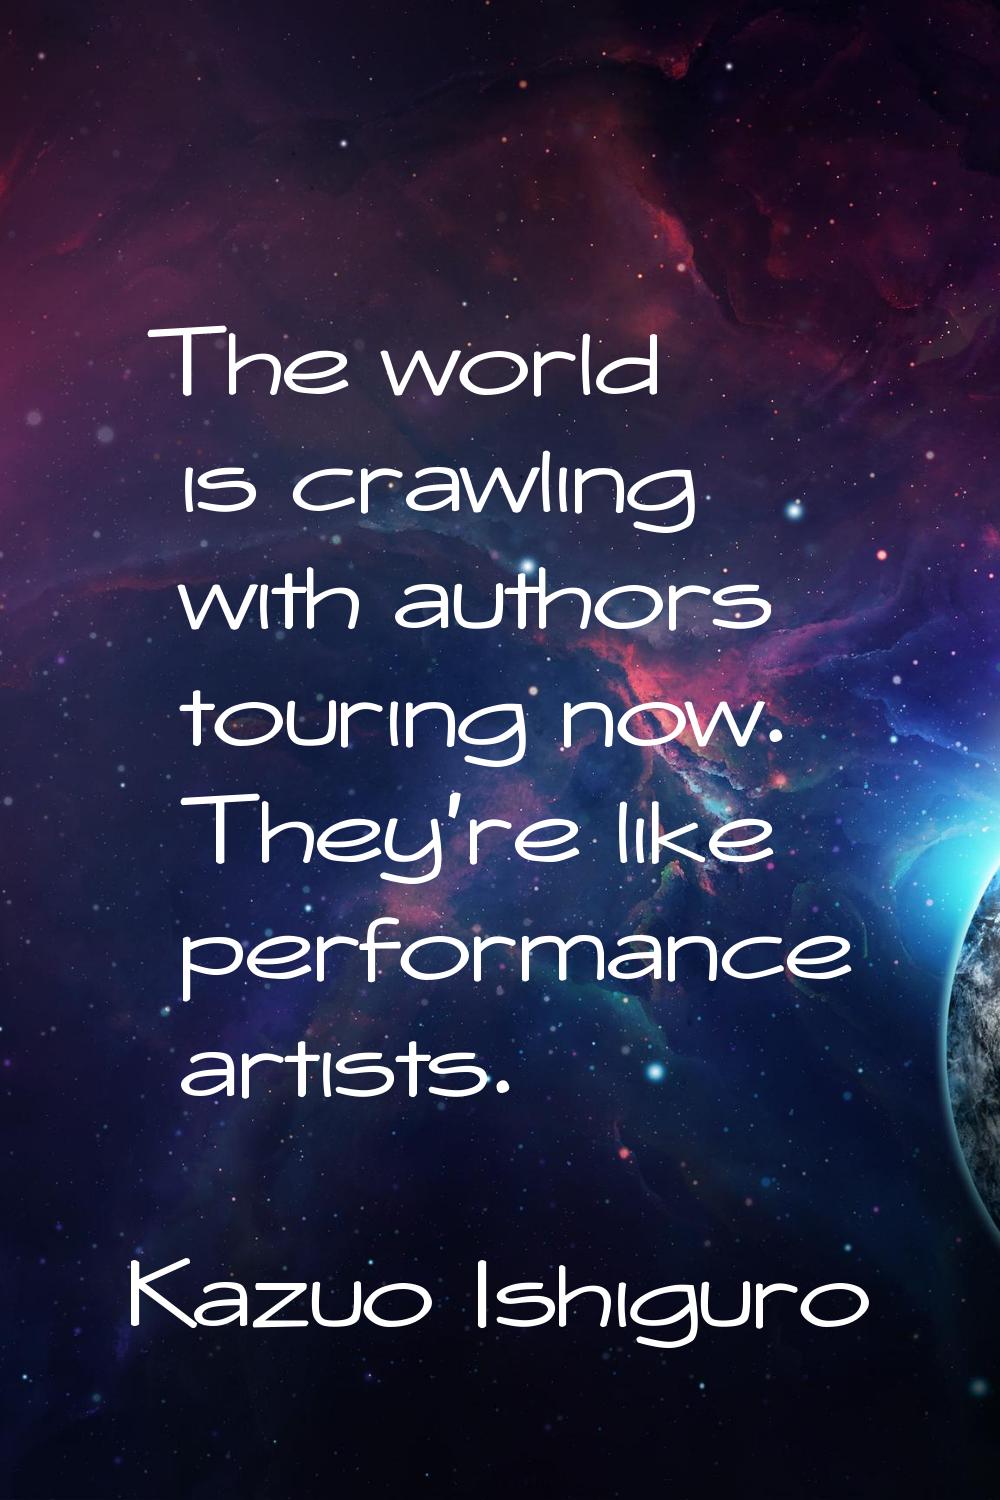 The world is crawling with authors touring now. They're like performance artists.